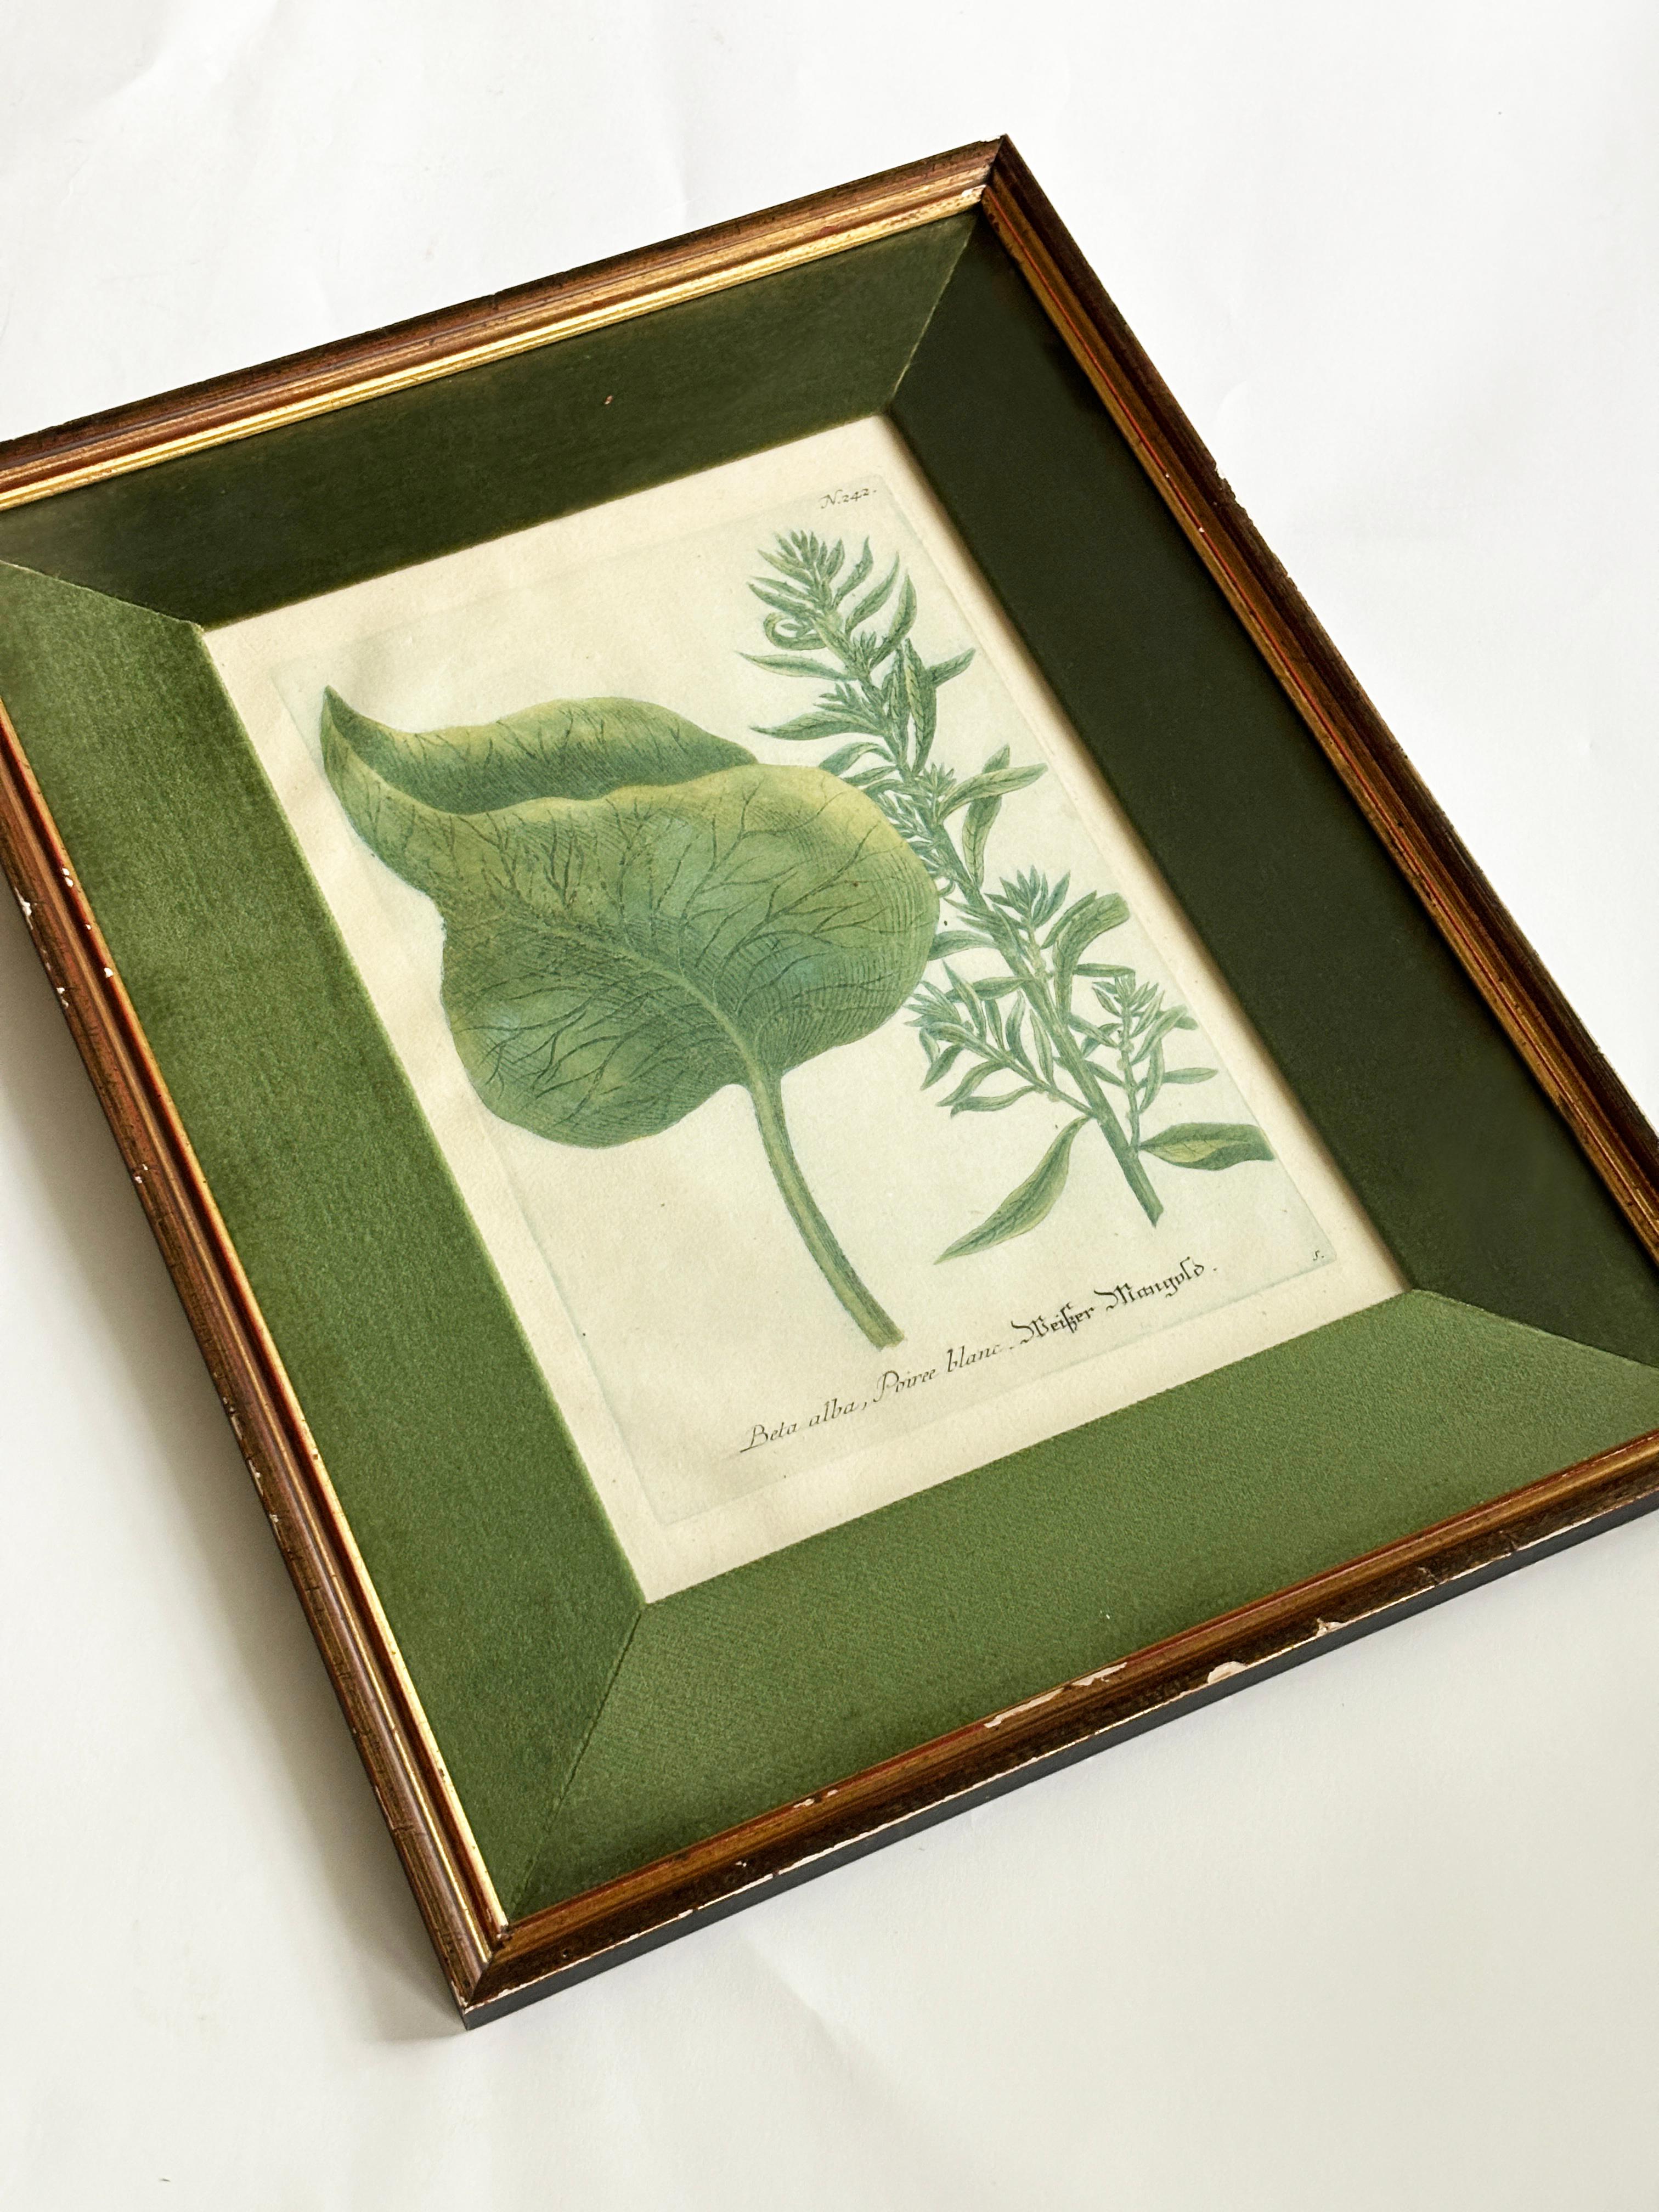 Framed Botanical Engraving, Johann Wilhelm Weinmann. Johann Wilhelm Weinmann (German 1683-1741) Published in Amsterdam & Ratisbon, 1736-45. This copper engraving was created in  1734. This image is among the earliest examples of color printing from